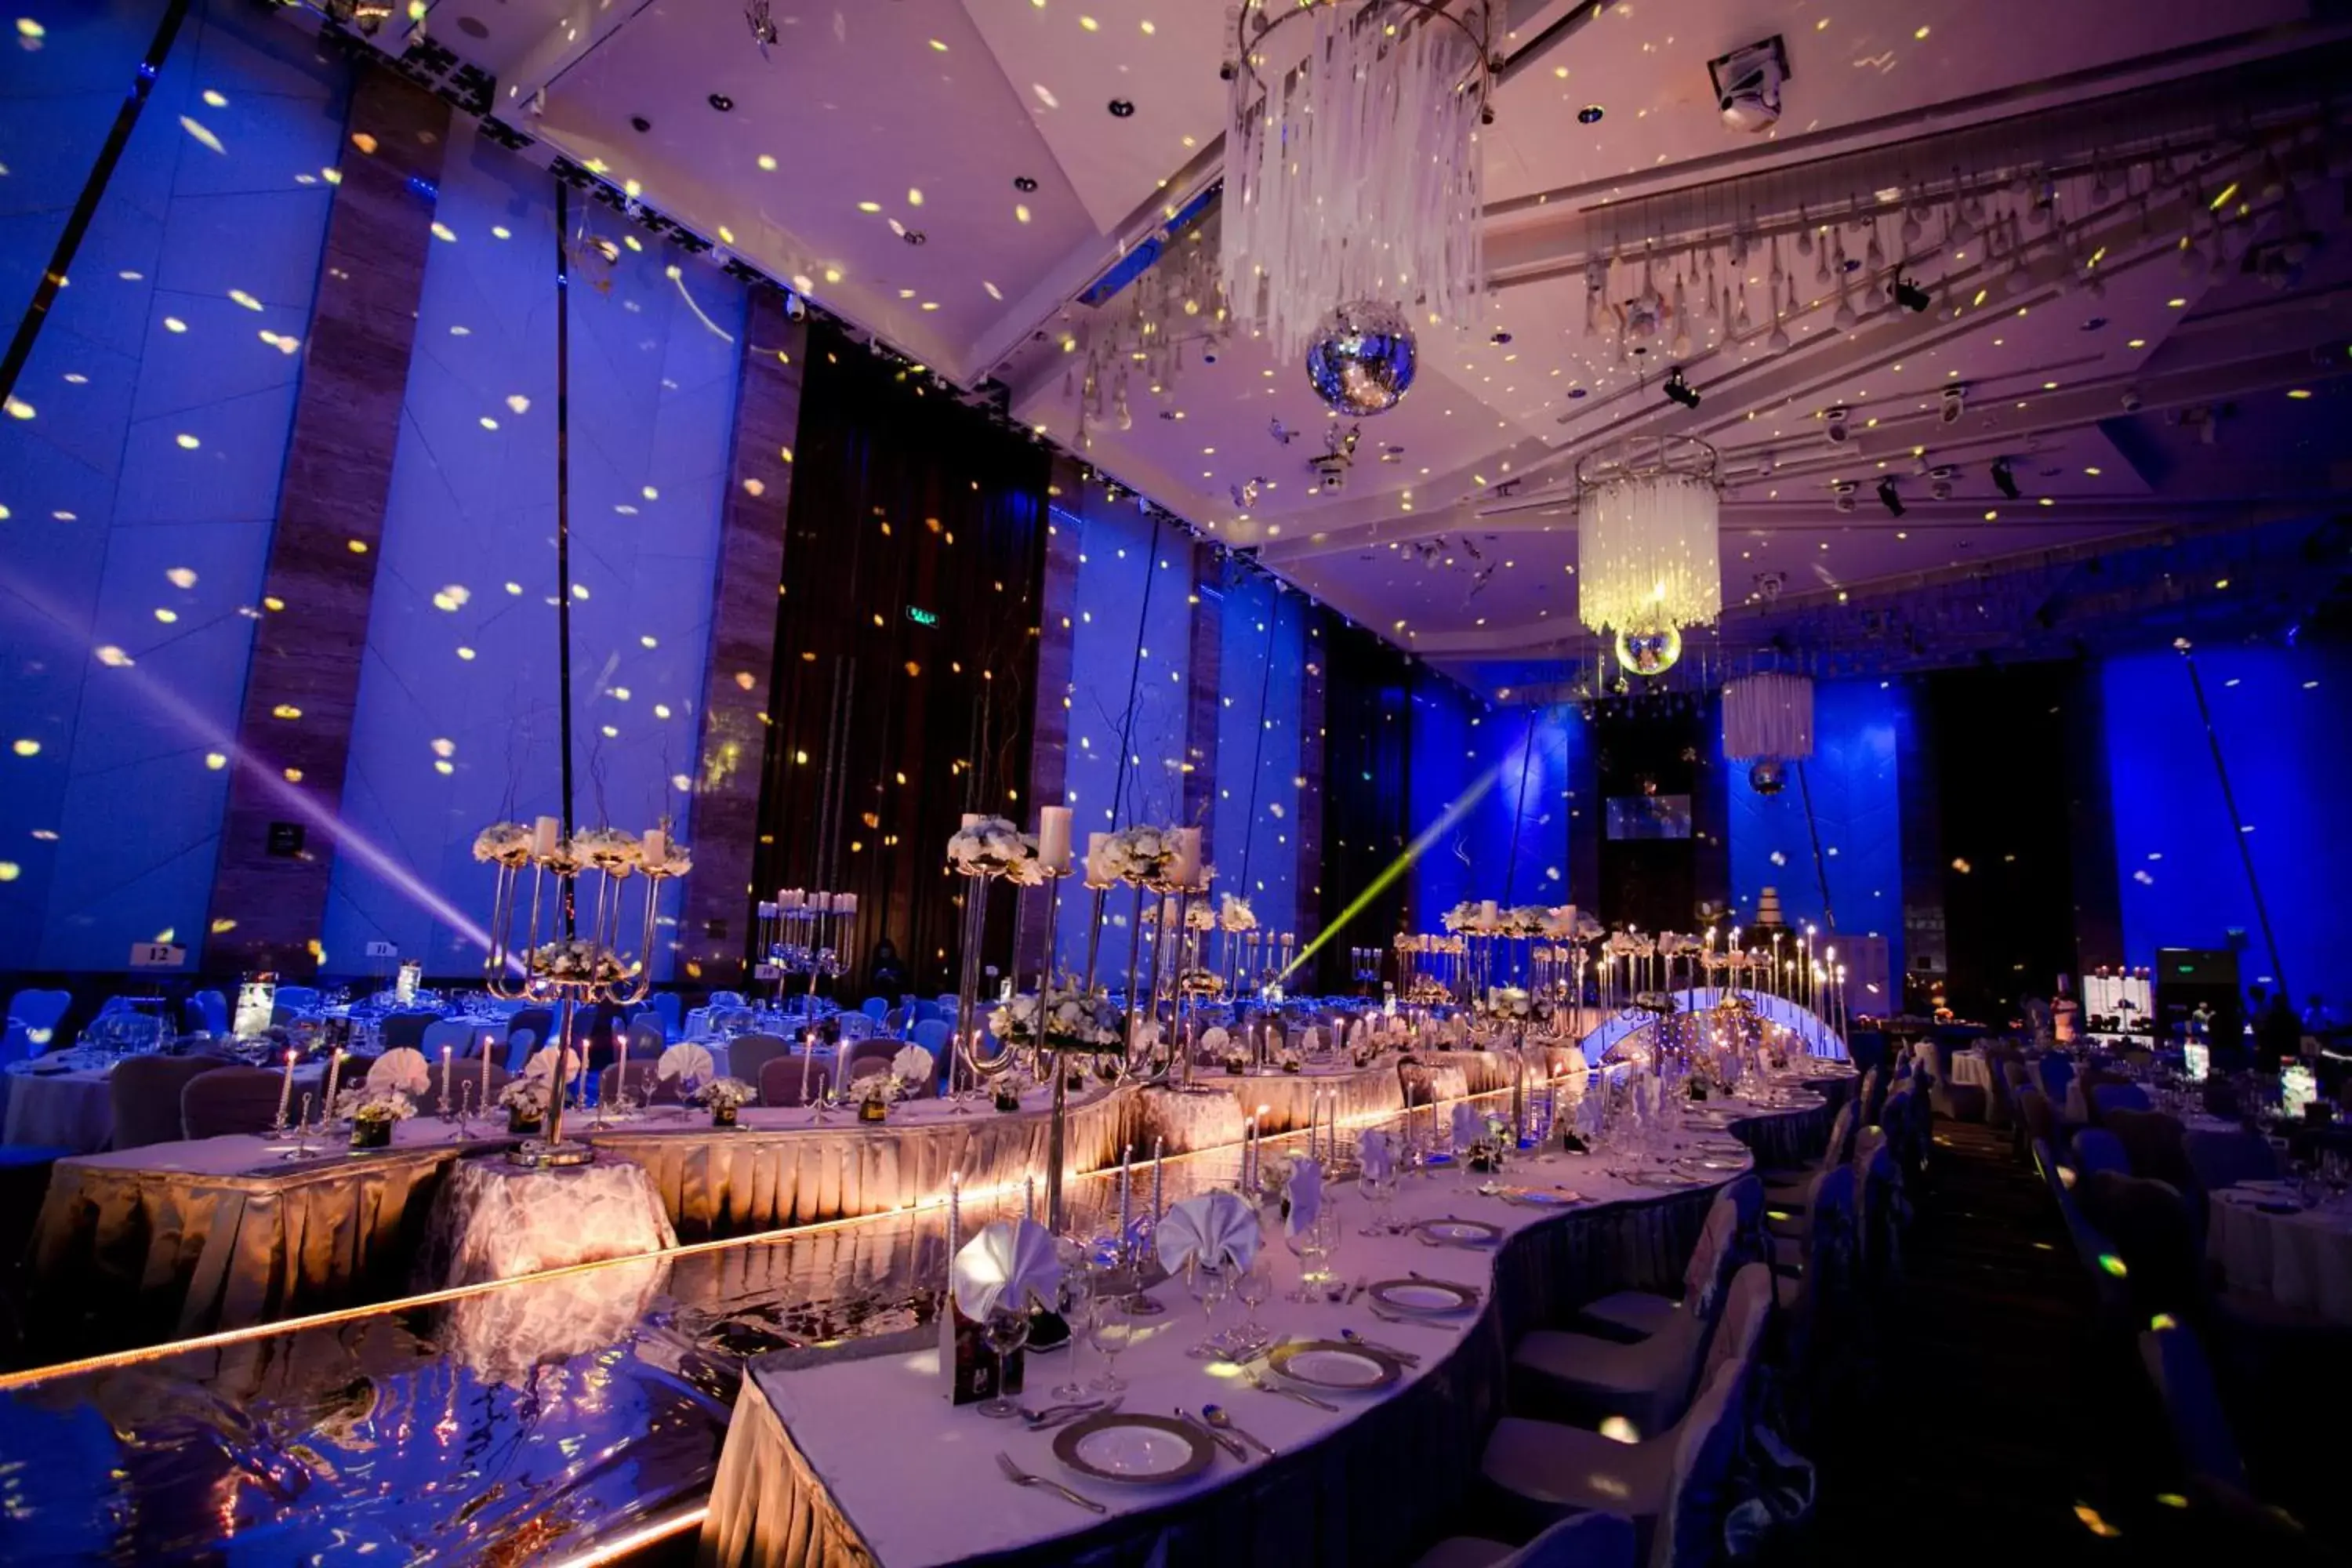 Banquet/Function facilities in Crowne Plaza Guangzhou City Centre, an IHG Hotel